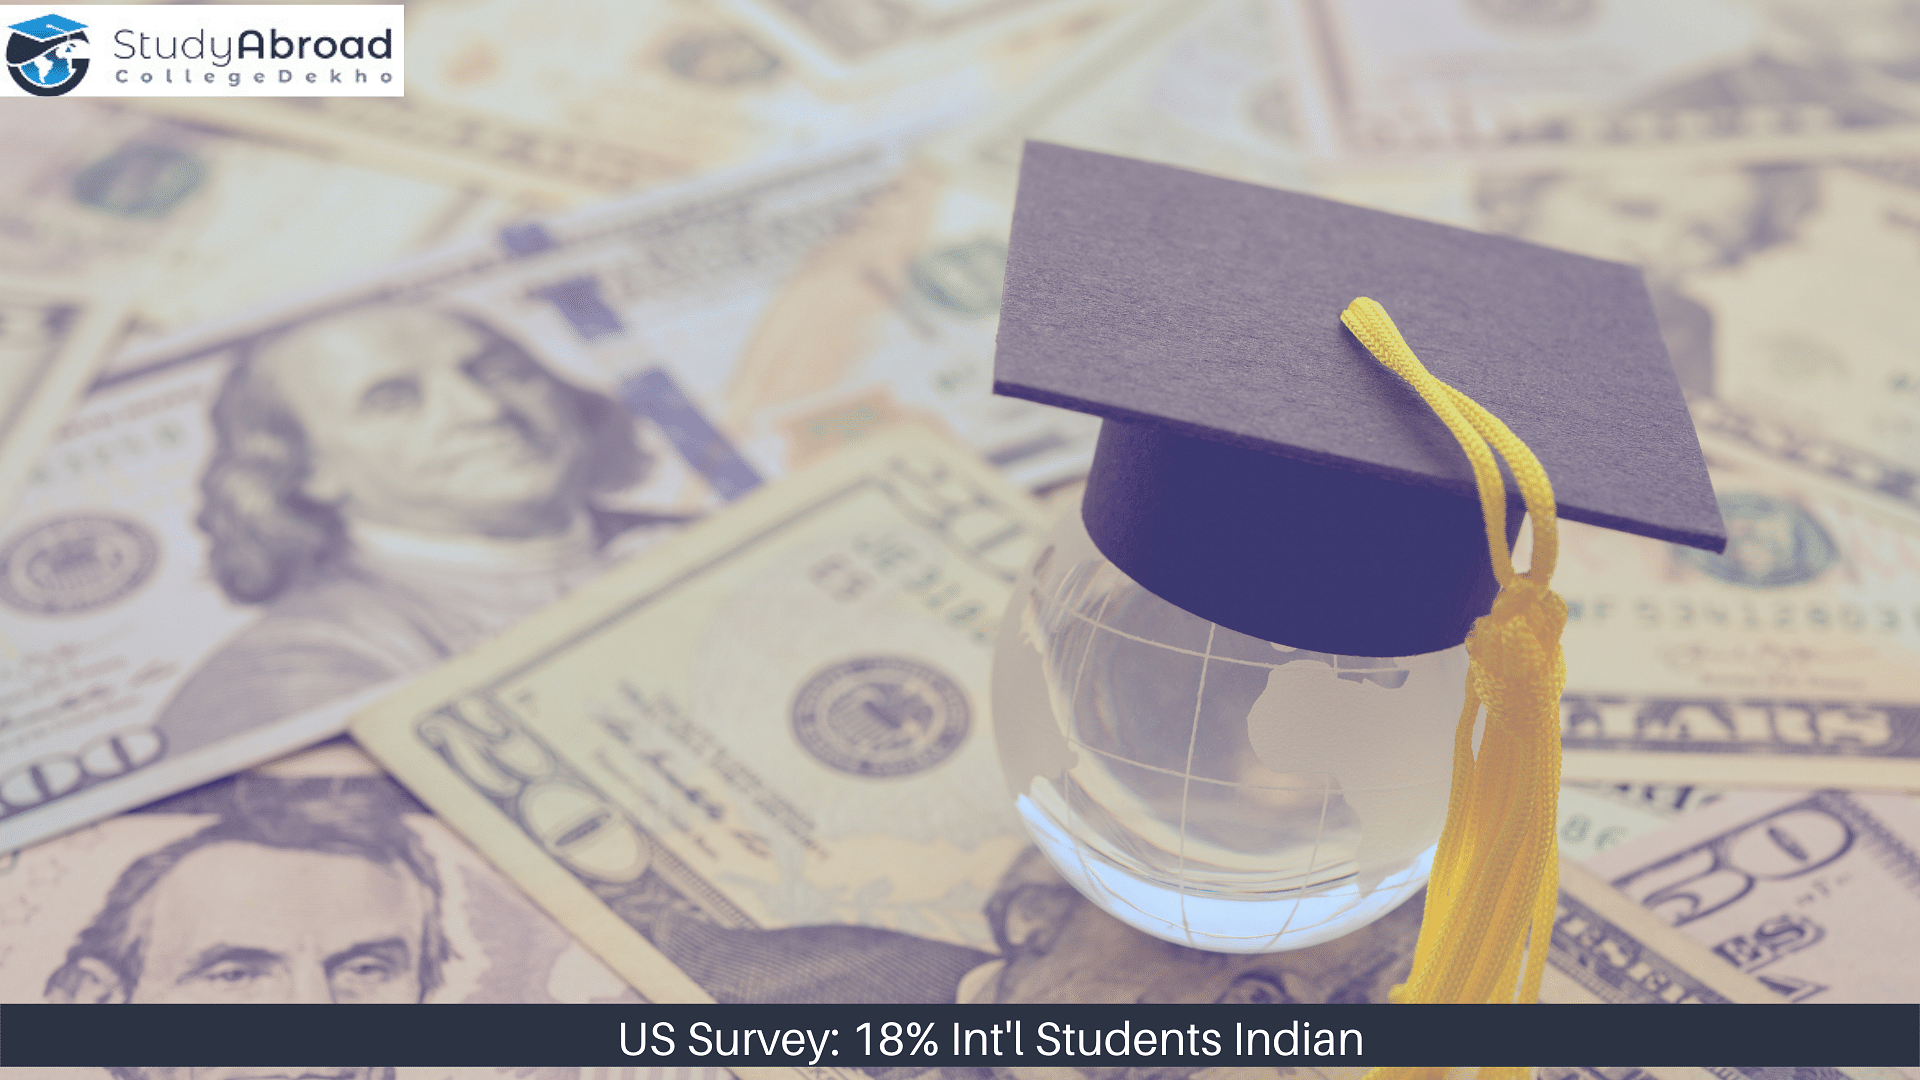 India is 2nd Largest Source for Incoming Int'l Students to US in 2020-2021 School Year: Report